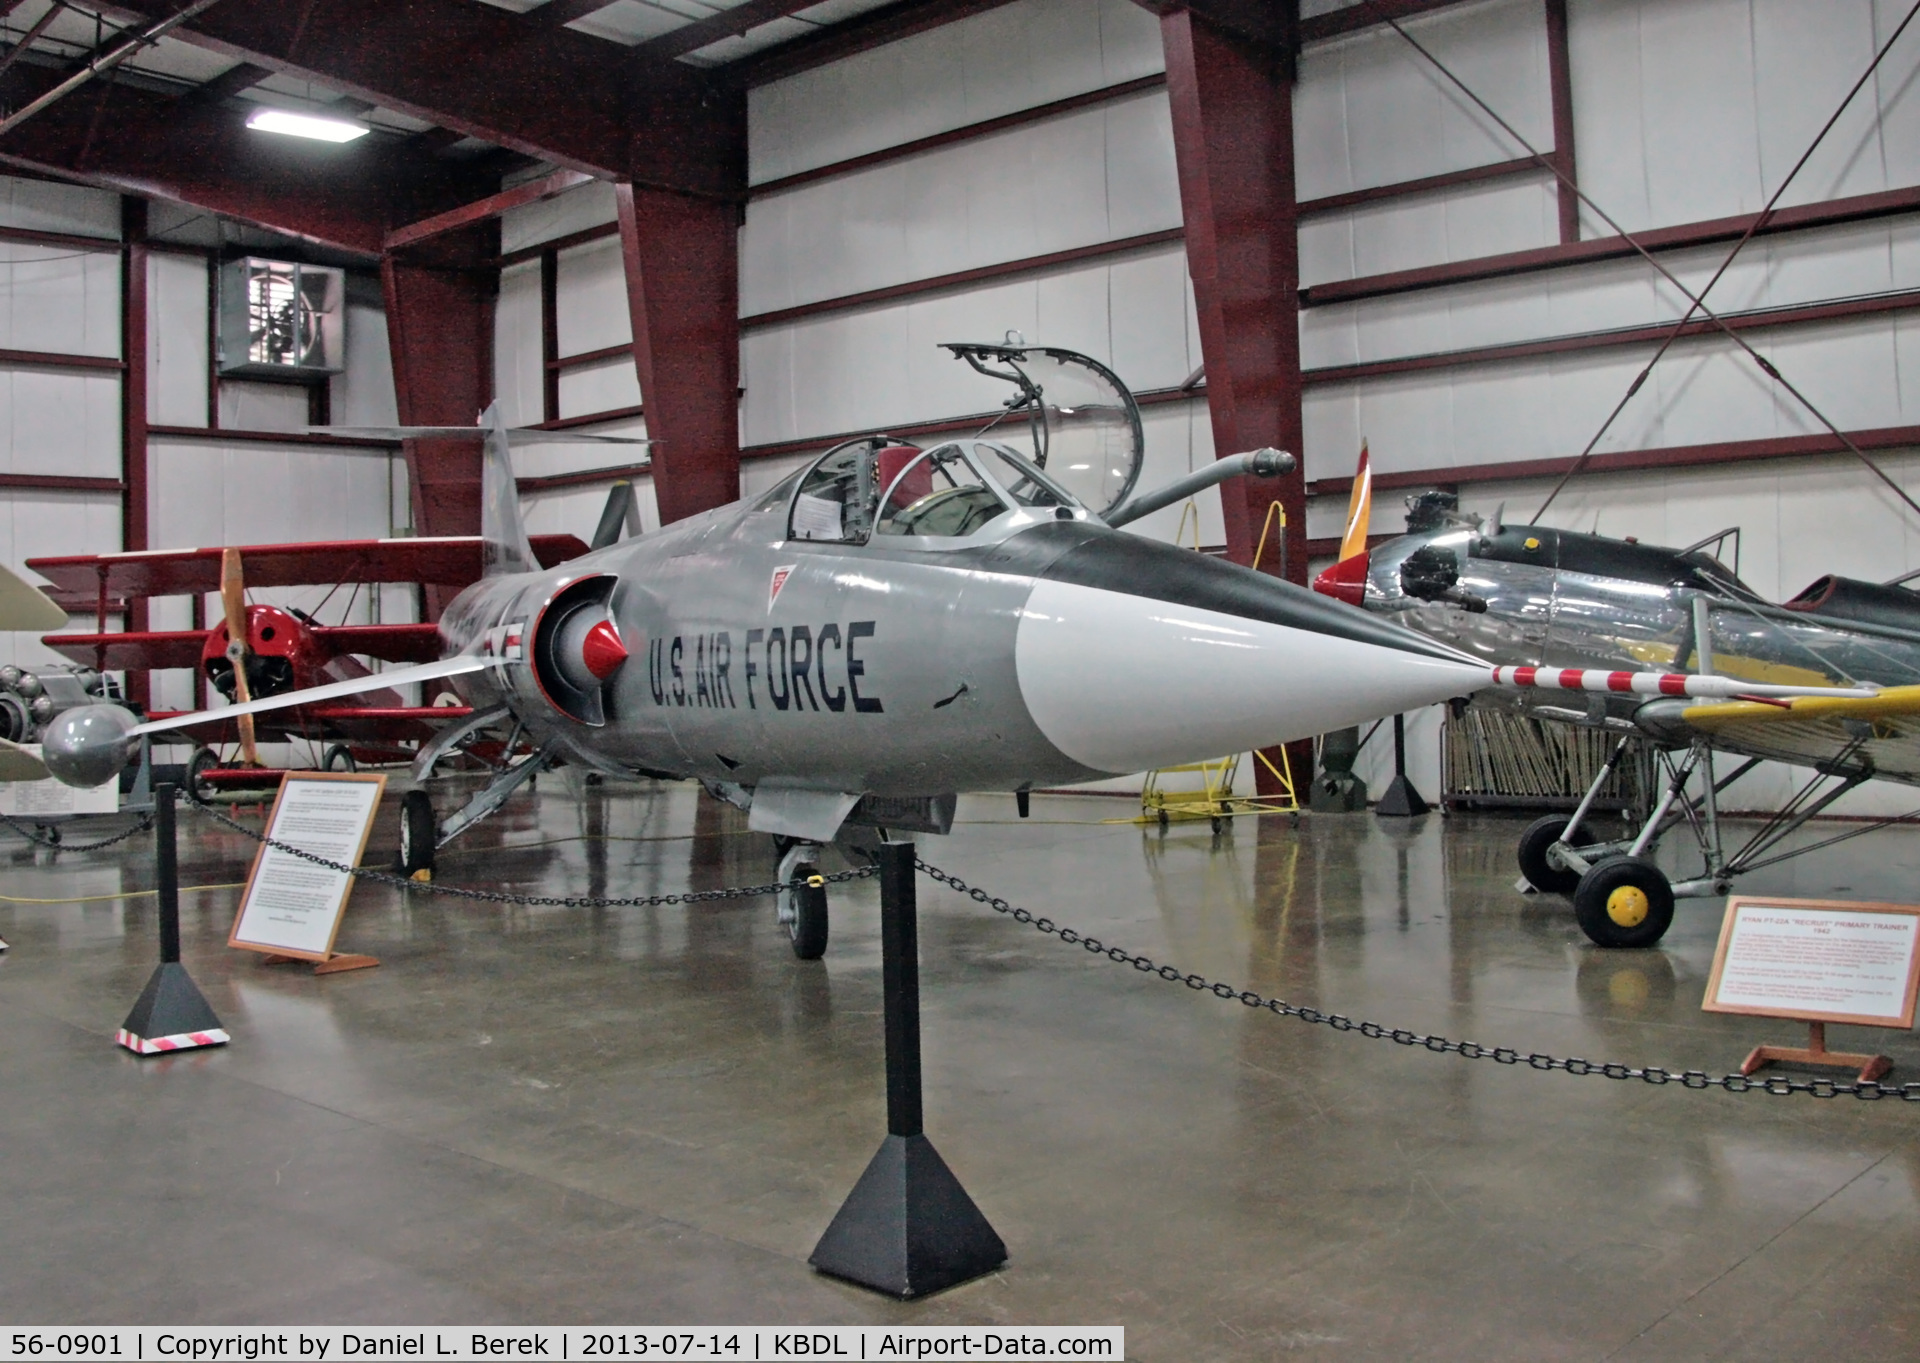 56-0901, 1956 Lockheed F-104C Starfighter C/N 383-1189, In 2013, the restoration of this aircraft was complete.